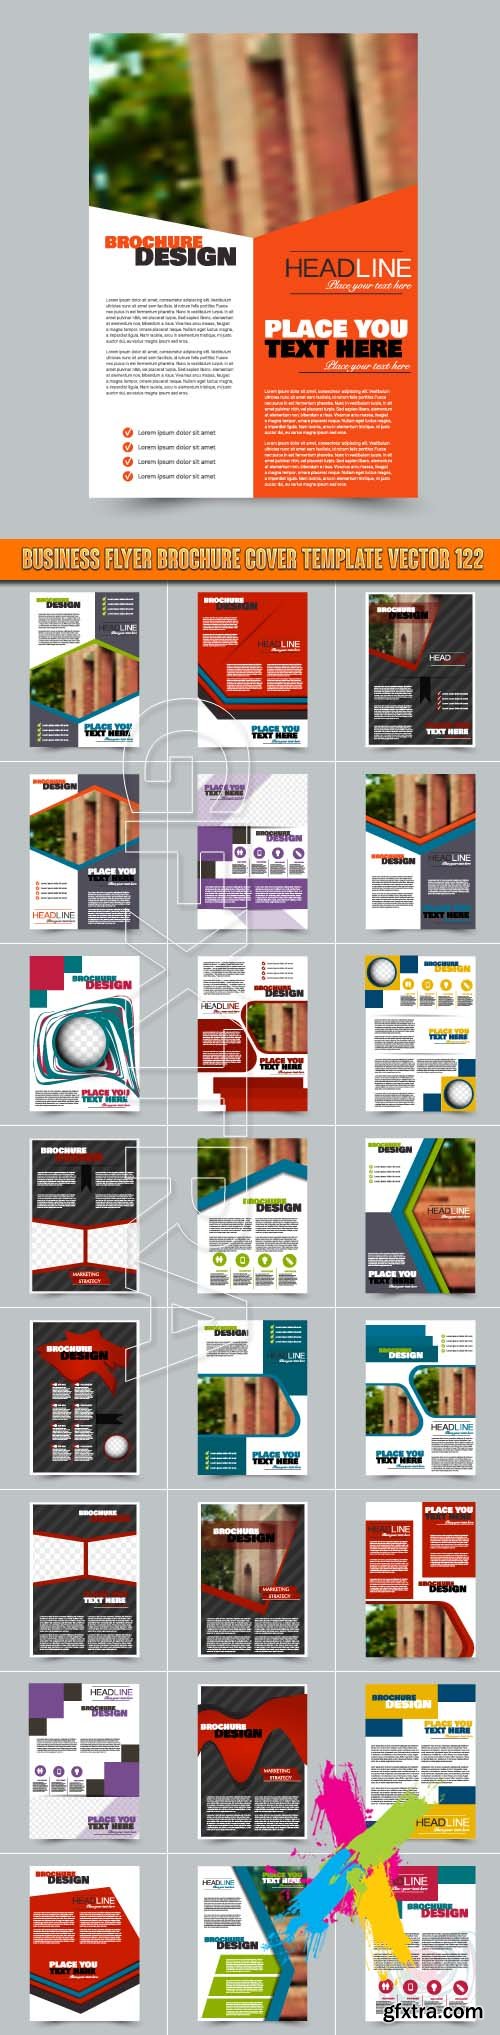 Business flyer brochure cover template vector 122